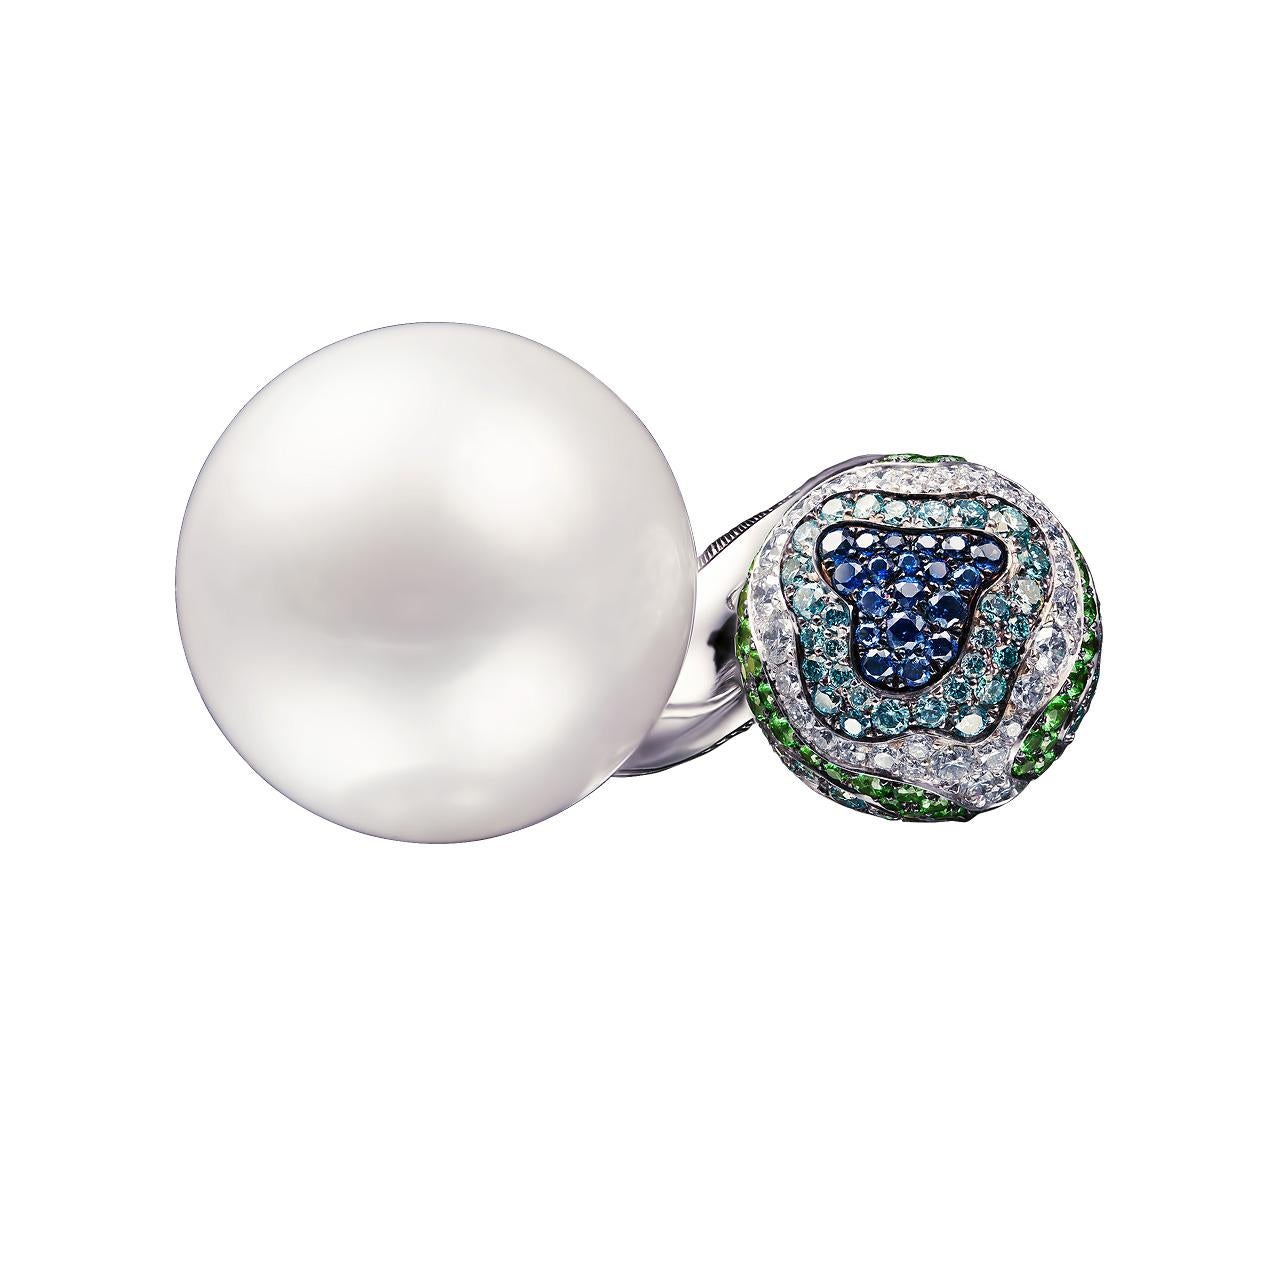 - 77 Round Diamonds – 0.65 ct, D-F/VVS
- 80 Round Blue Diamonds – 0.61 ct
- 66 Round Sapphires– 0.58 ct
- 67 Round Tsavorites– 0.60 ct
- 18.3 mm White South Sea pearl
- 18K White Gold 
- Weight: 19.79 g
- Size: 16.5 mm
This fabulous ring from the